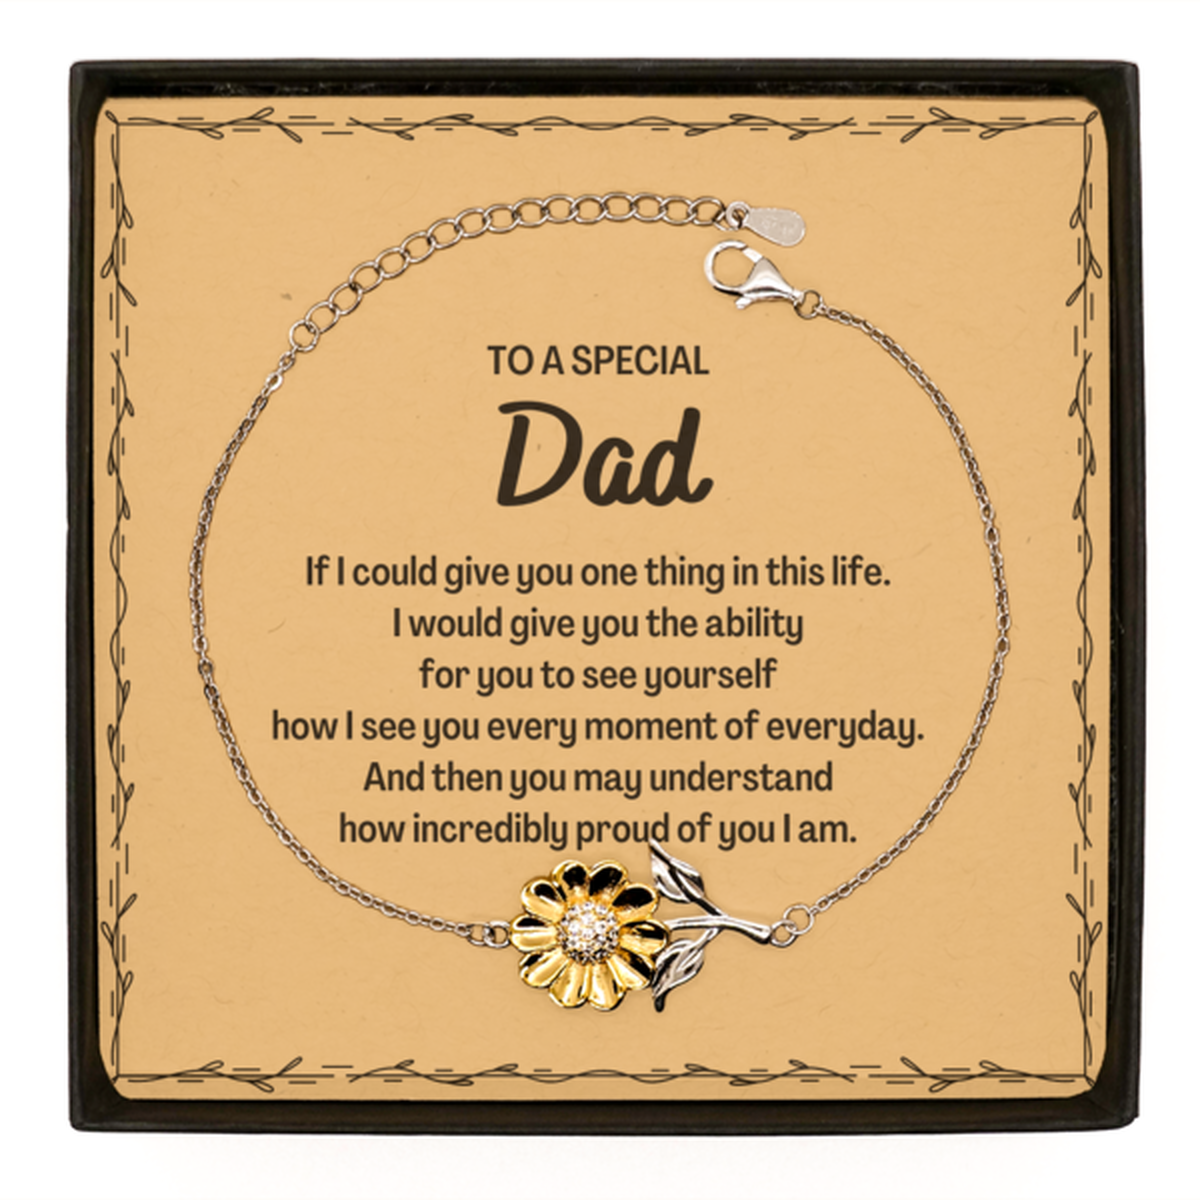 To My Dad Sunflower Bracelet, Gifts For Dad Message Card, Inspirational Gifts for Christmas Birthday, Epic Gifts for Dad To A Special Dad how incredibly proud of you I am